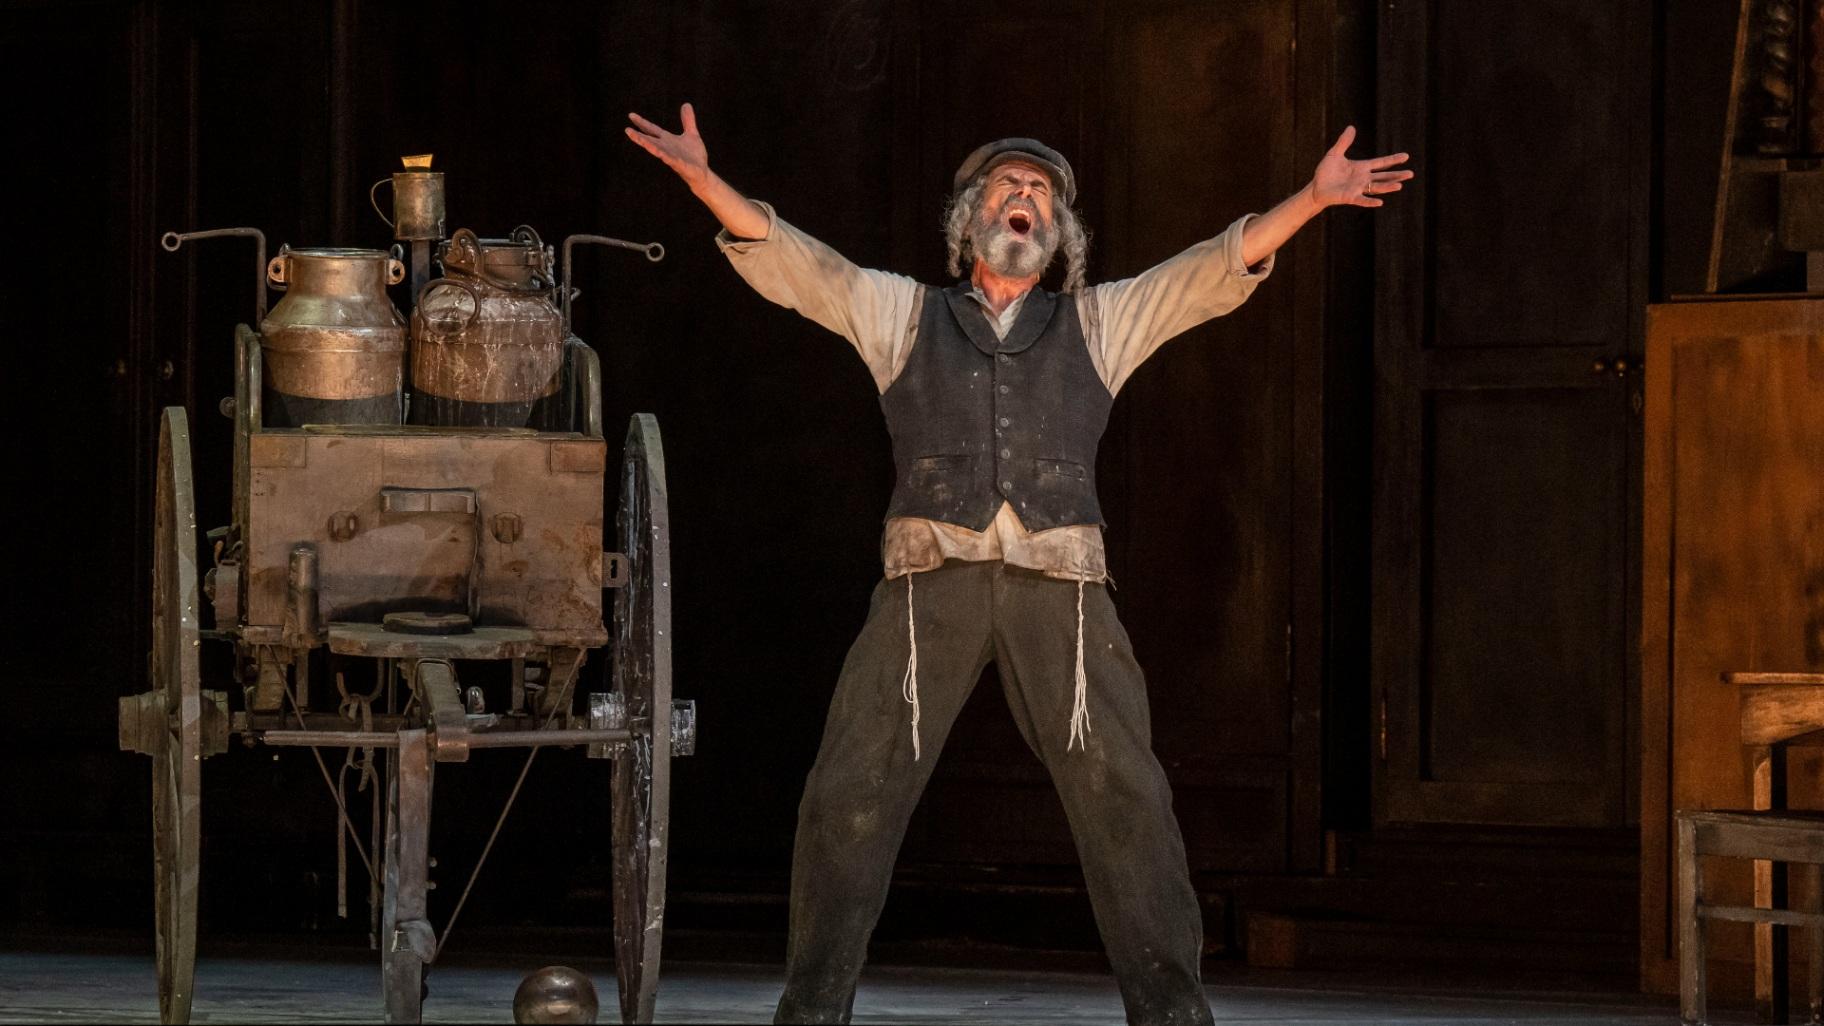 Steven Skybell as “Tevye” in Barrie Kosky’s production of “Fiddler on the Roof” at the Lyric Opera House. (Credit: Todd Rosenberg)